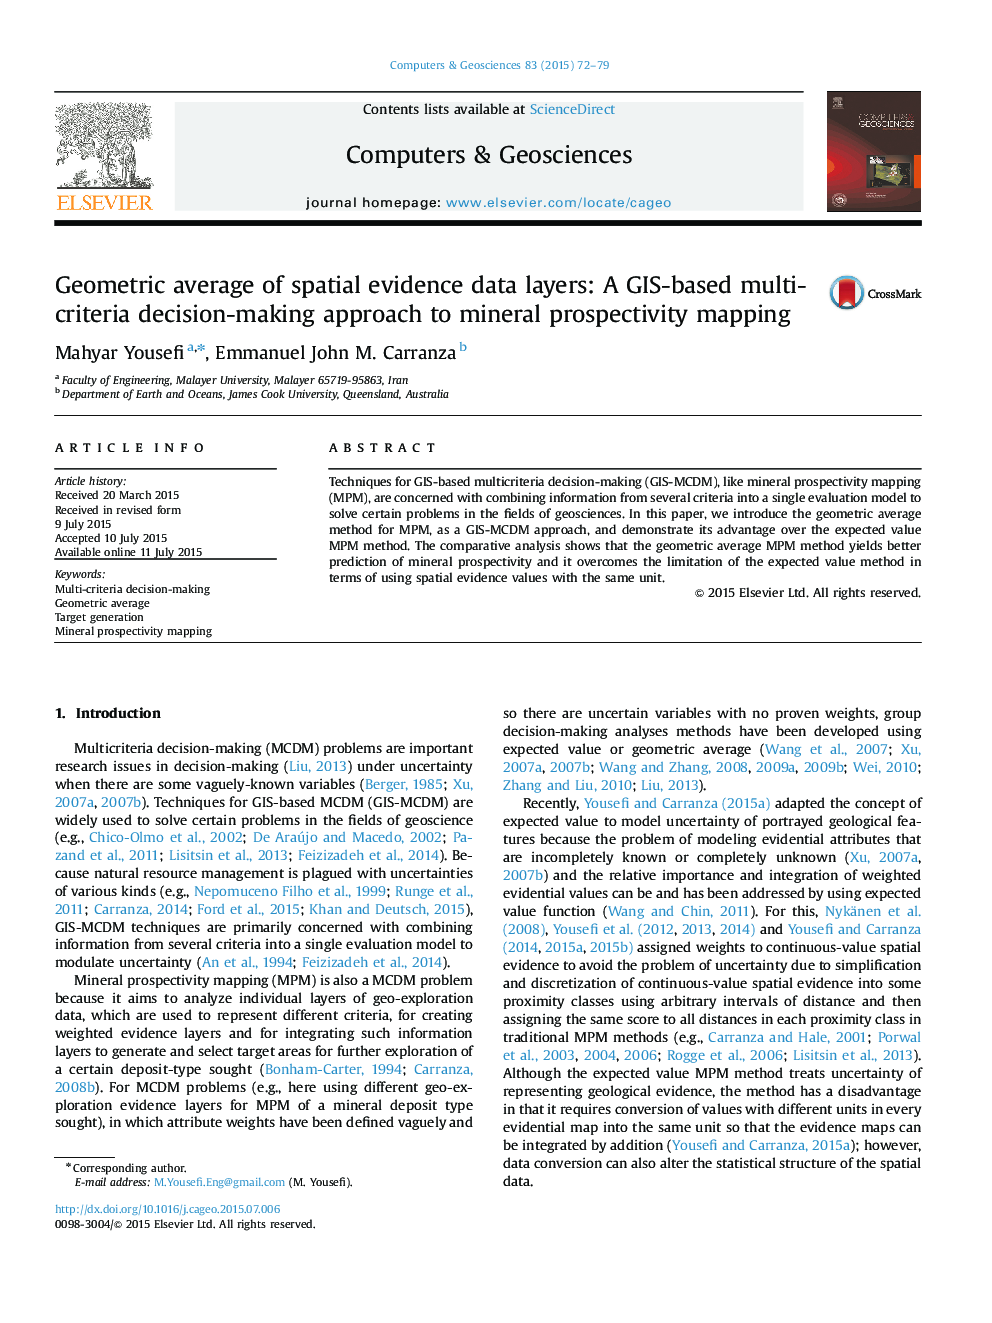 Geometric average of spatial evidence data layers: A GIS-based multi-criteria decision-making approach to mineral prospectivity mapping